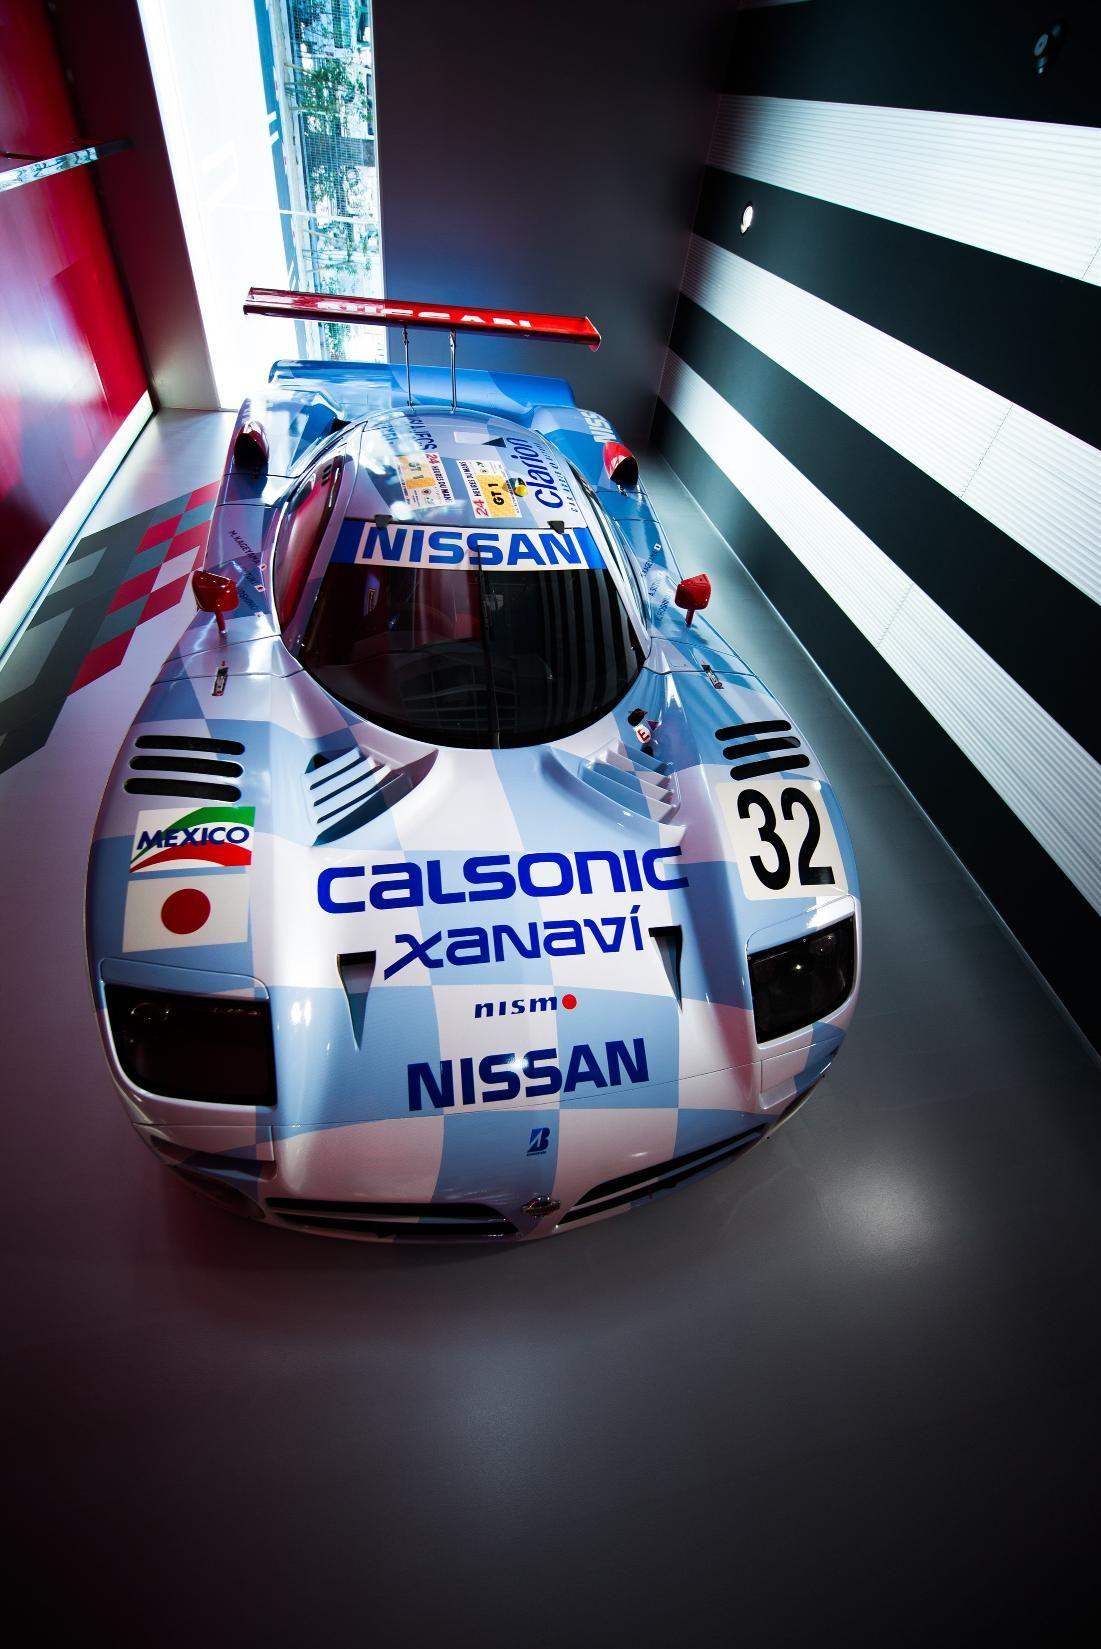 Nissan R390 Gt1 Favorite Car Of All Time Coches De Carreras